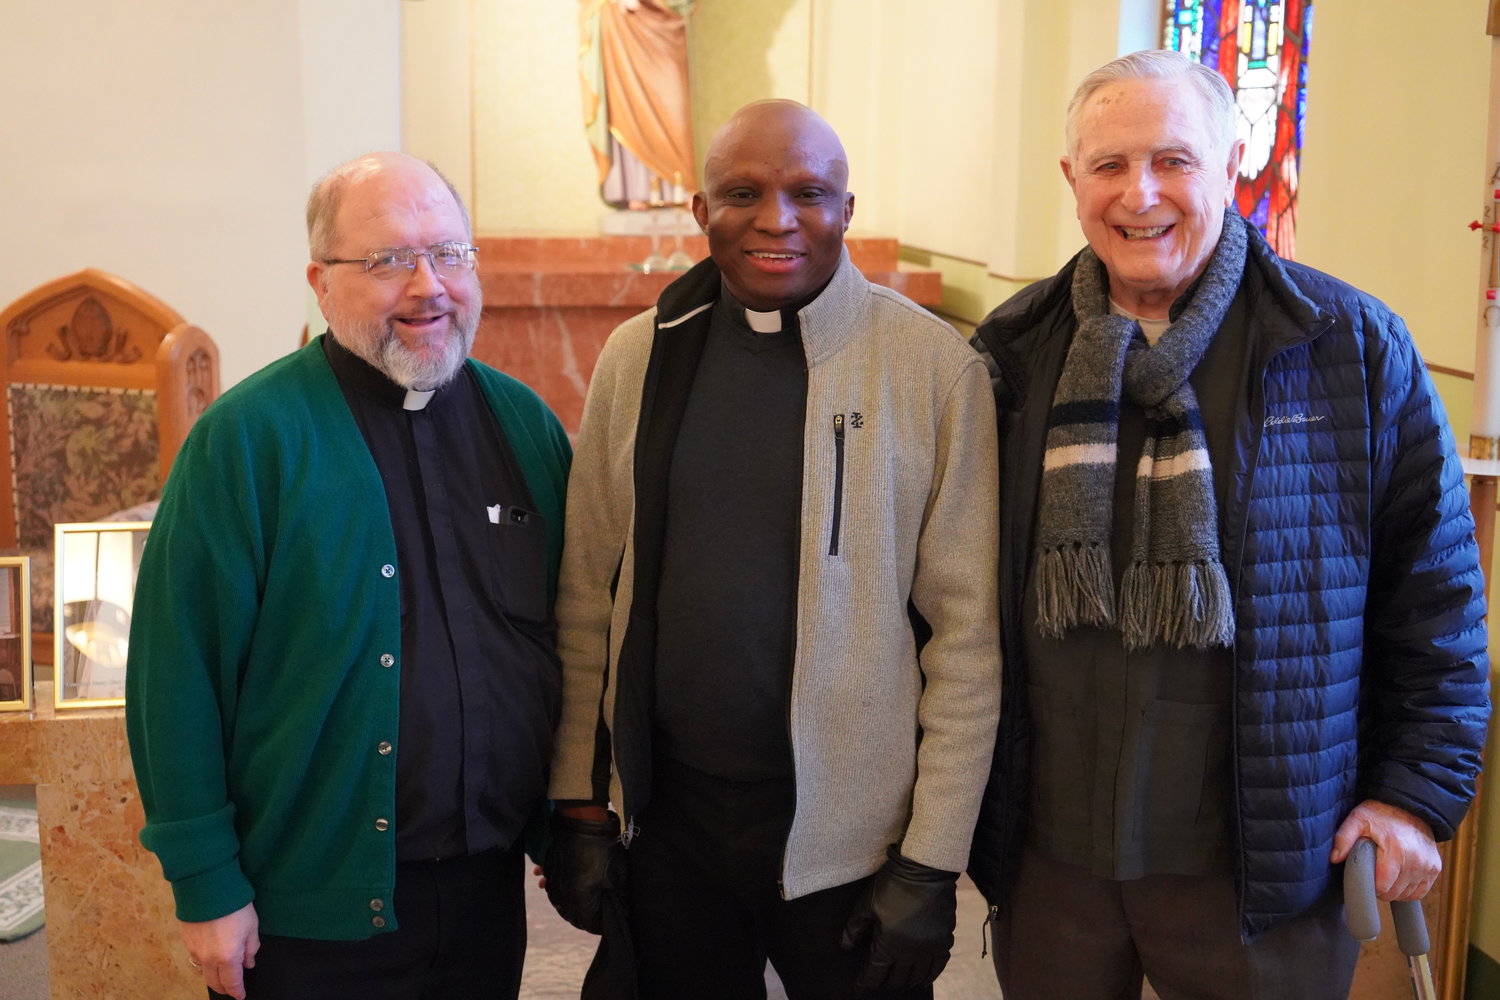 Father Robert Fields, pastor of St. Michael Parish in Kahoka and Shrine of St. Patrick Parish in St. Patrick; Father C. Callistus Okorojo, pastor of St. Joseph Parish in Canton and Queen of Peace Parish in Ewing; and Franciscan Father James Wheeler, of Quincy, Illinois, a St. Patrick native, stop for a photo during the Shrine of St. Patrick Parish’s feastday celebration.